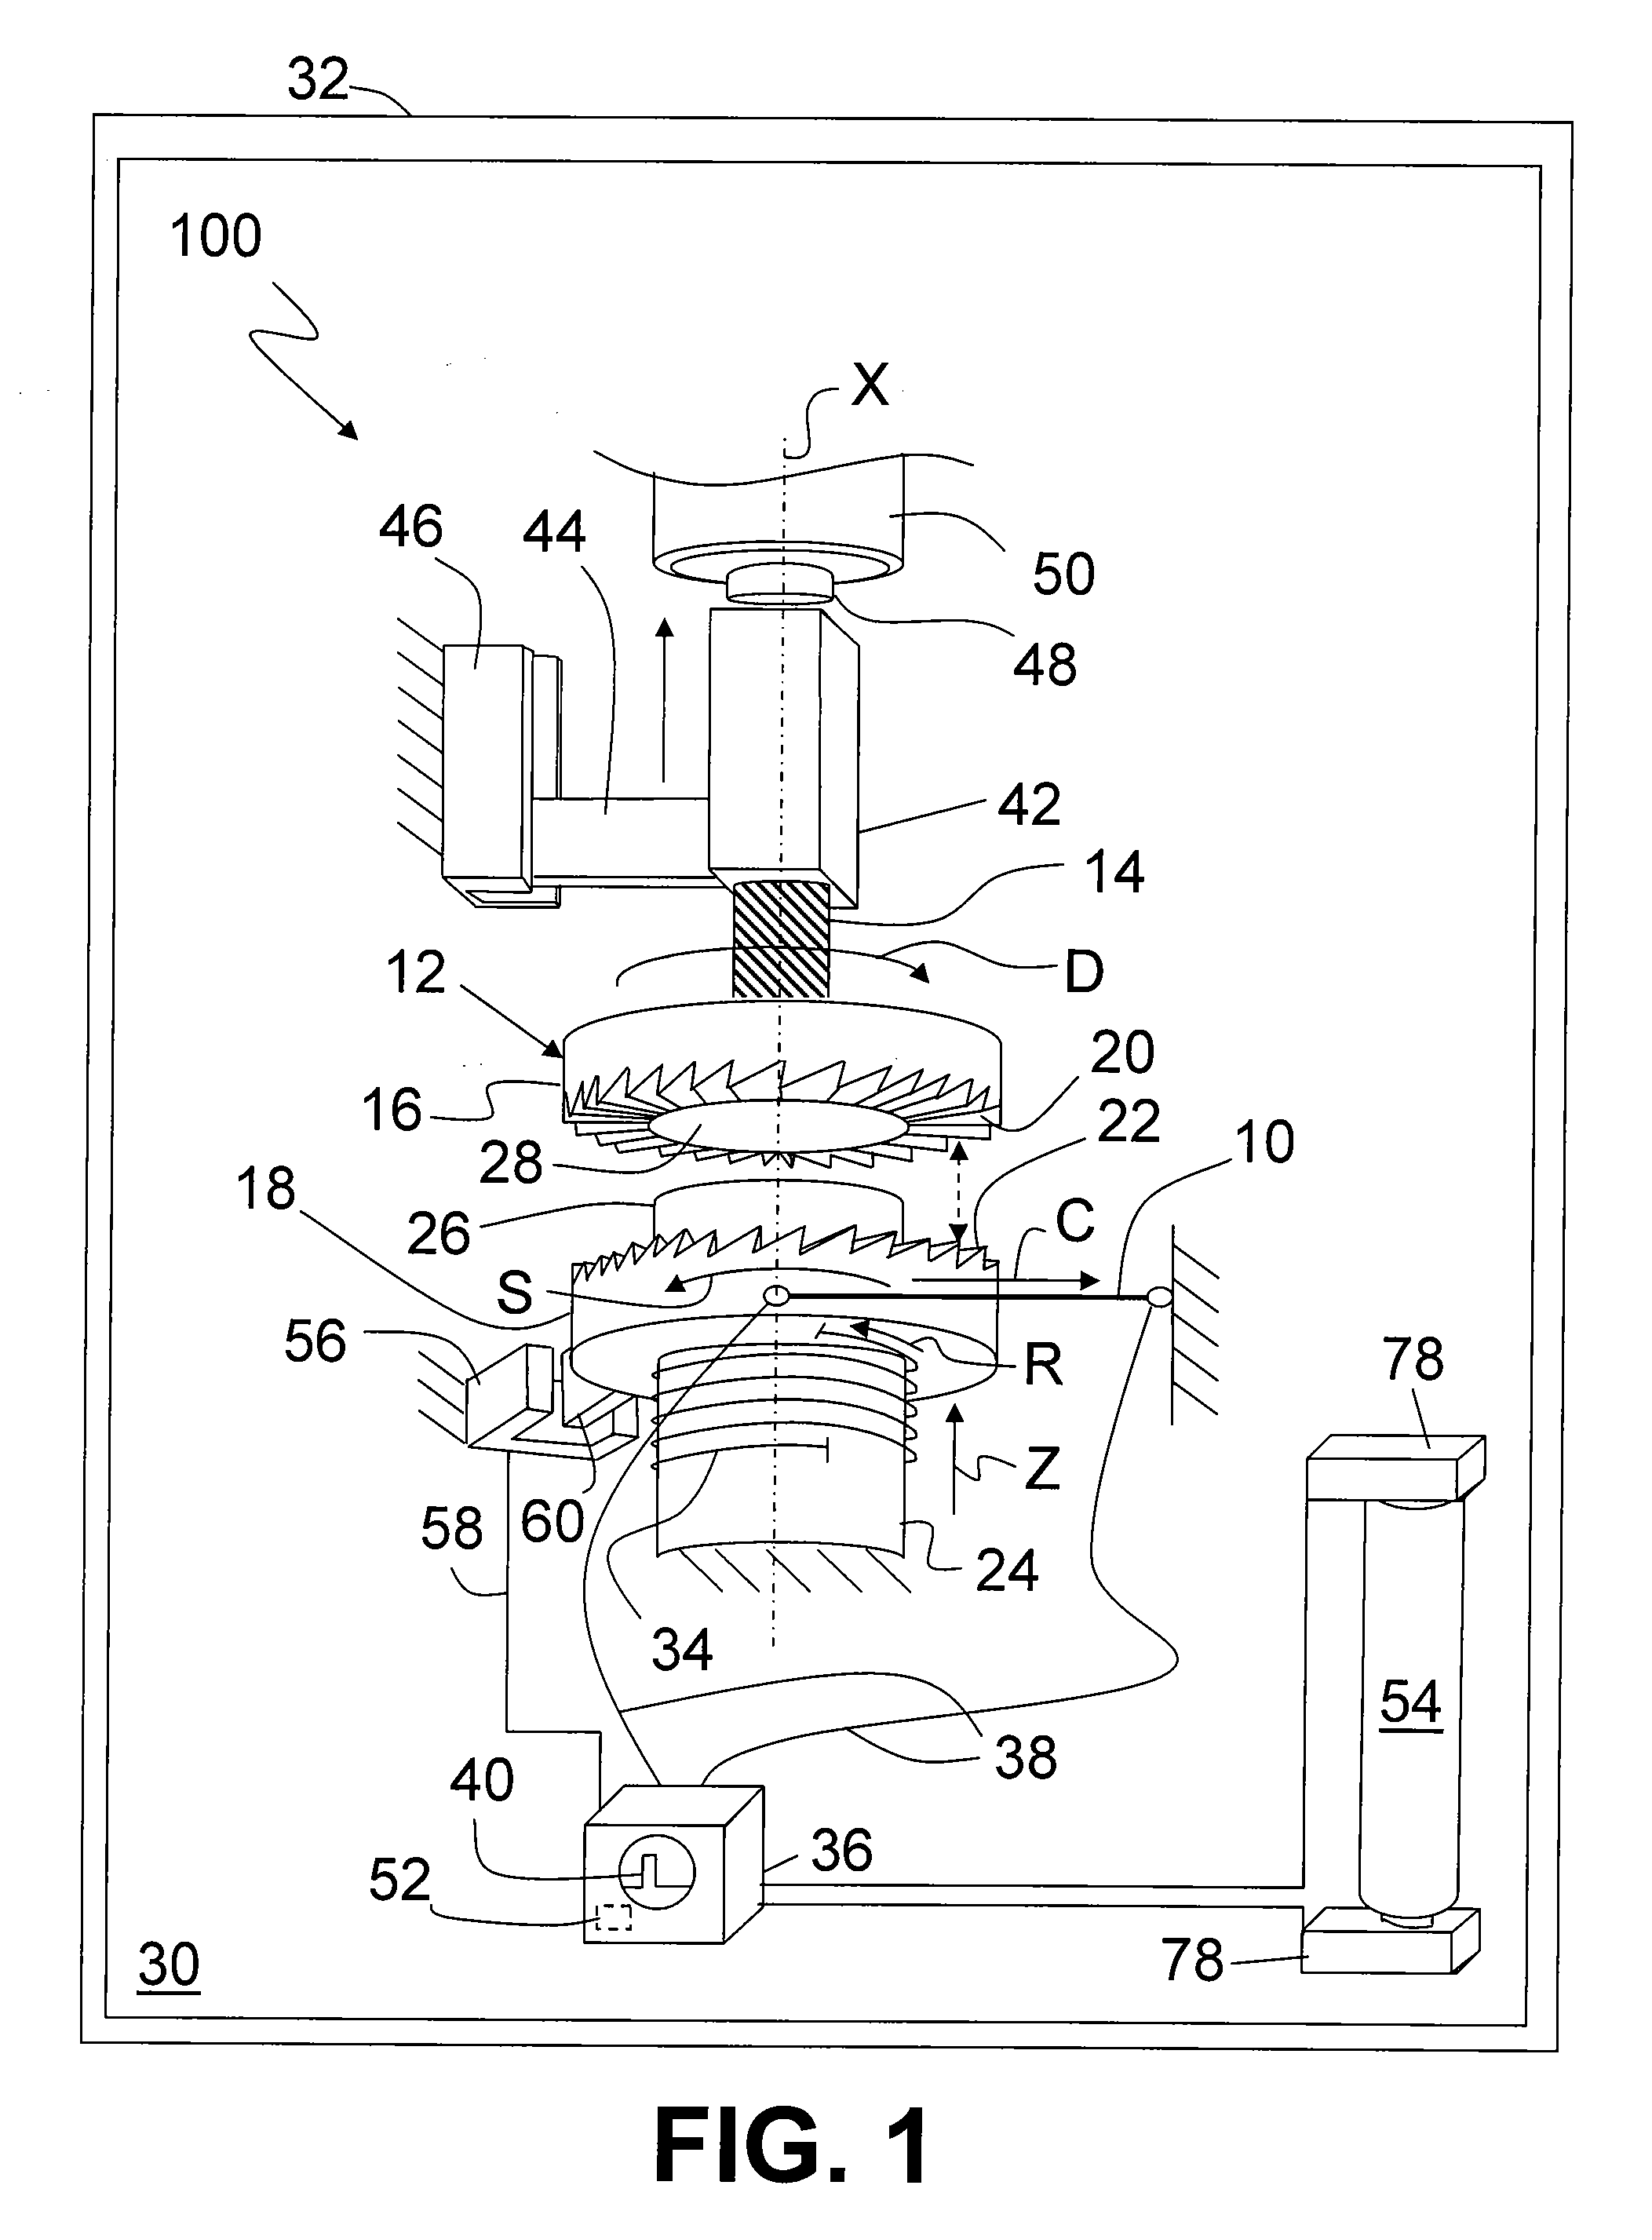 Lead screw delivery device using reusable shape memory actuator device